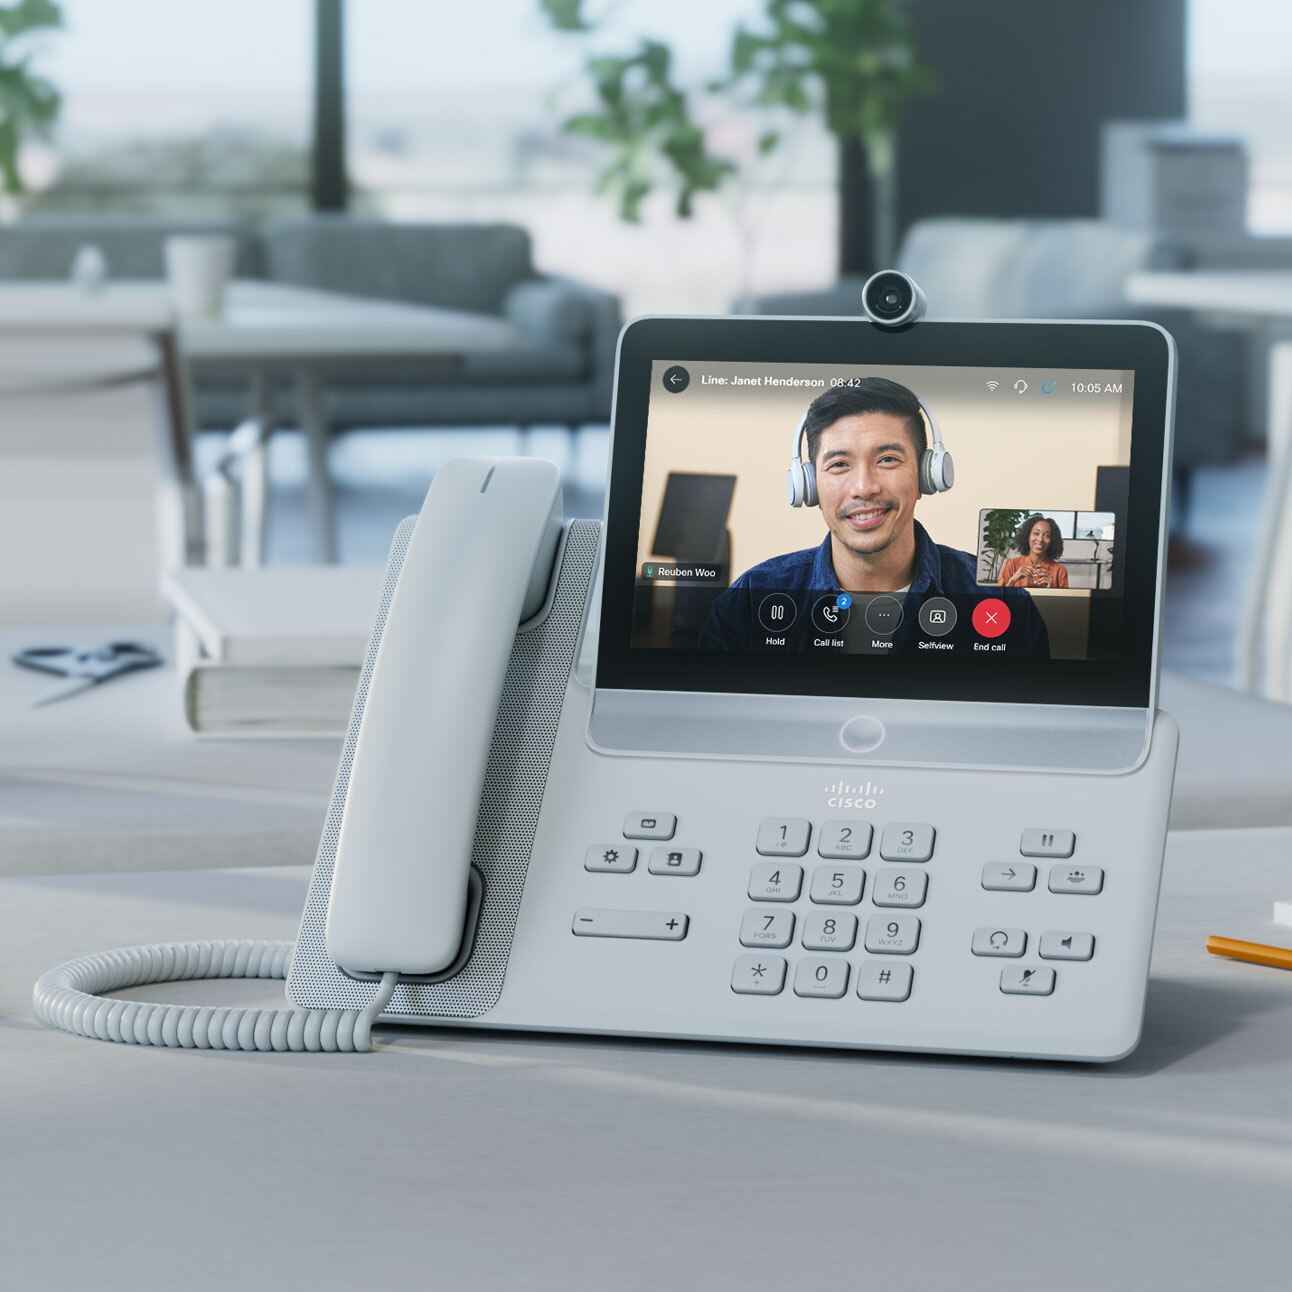 Video meeting in progress on a Cisco Video Phone 8875. Phone's screen shows a colleague who has video conferenced in.